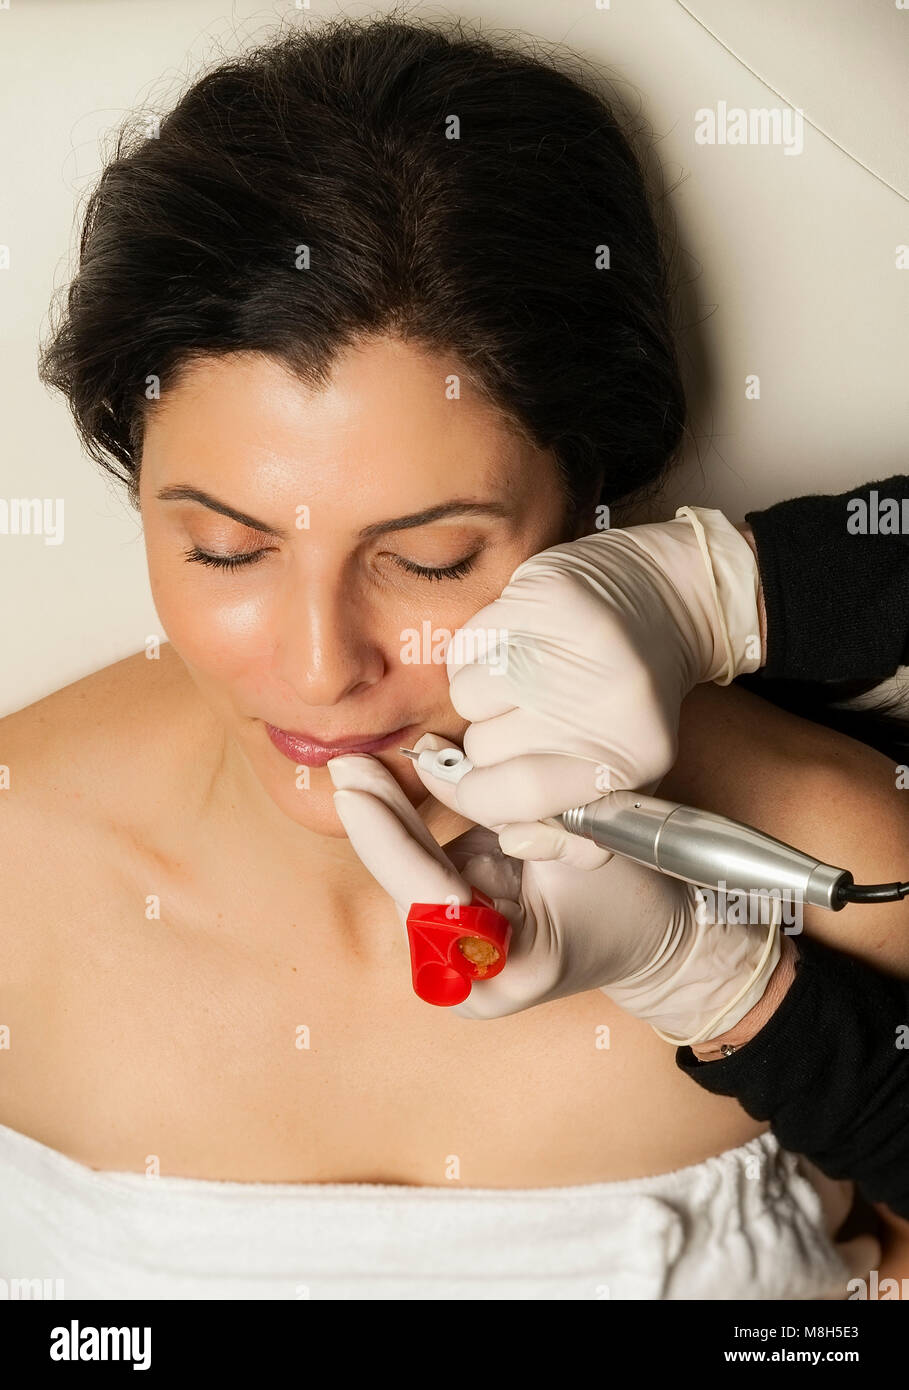 Micropigmentation procedure for the lips, permanent make-up. Stock Photo